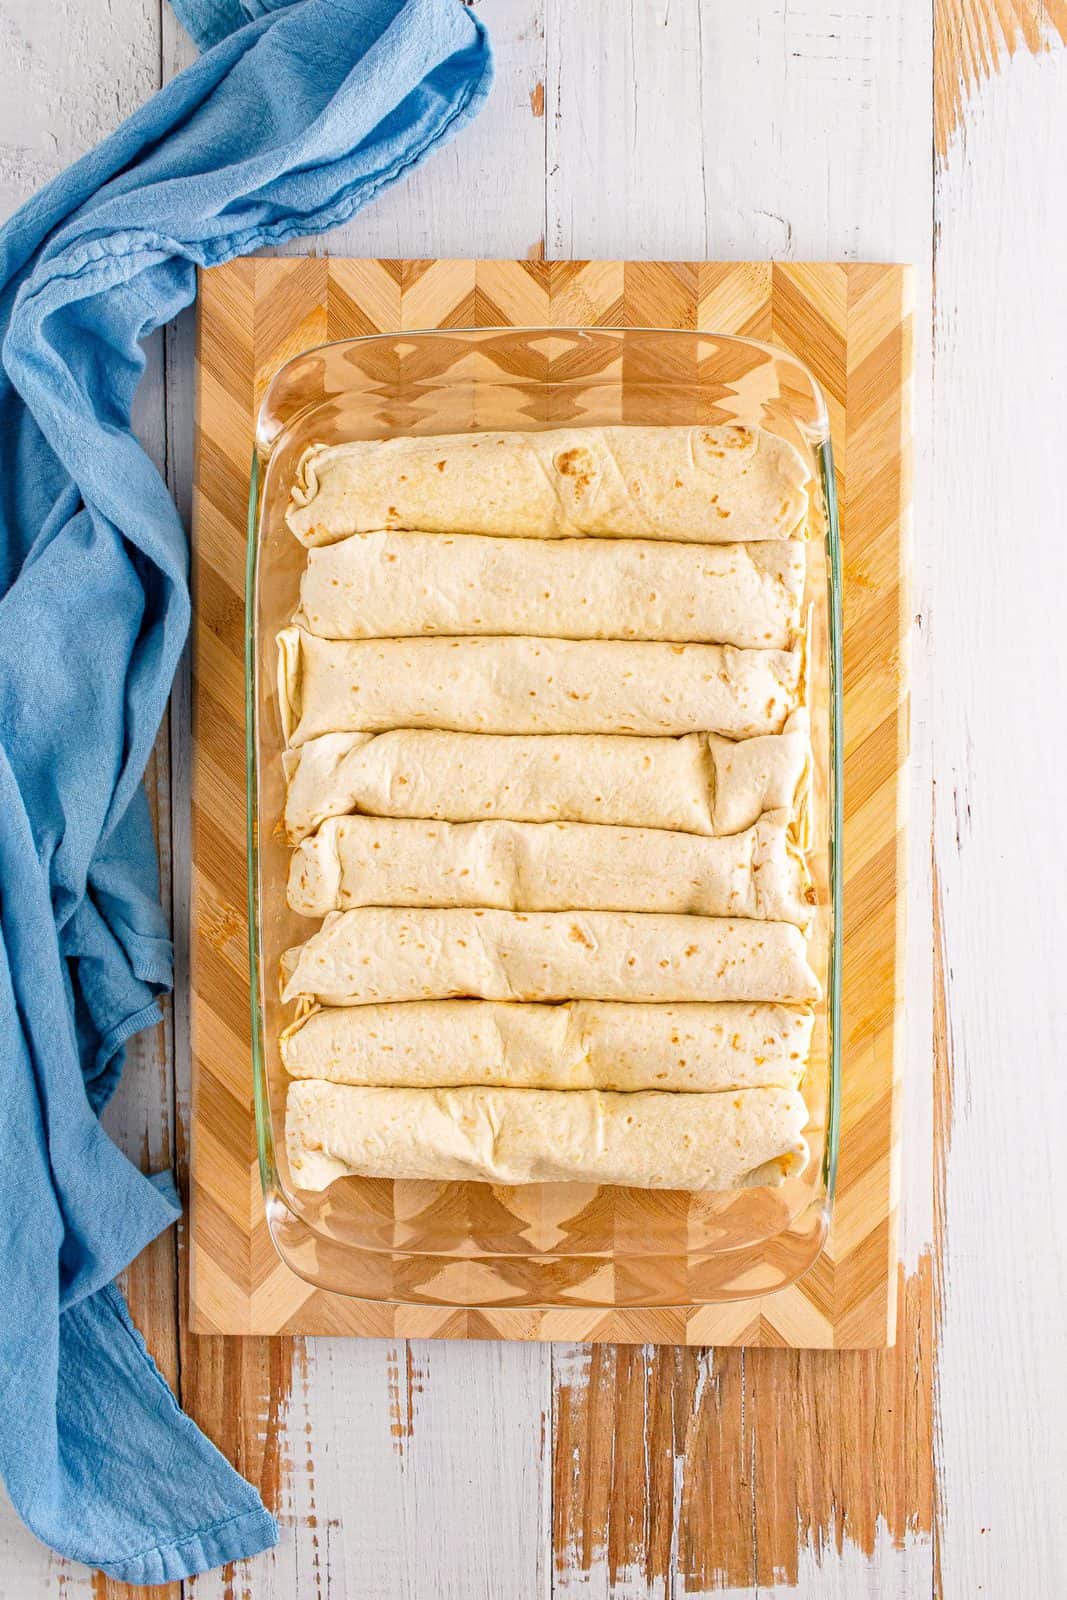 Rolled up enchiladas in pan.